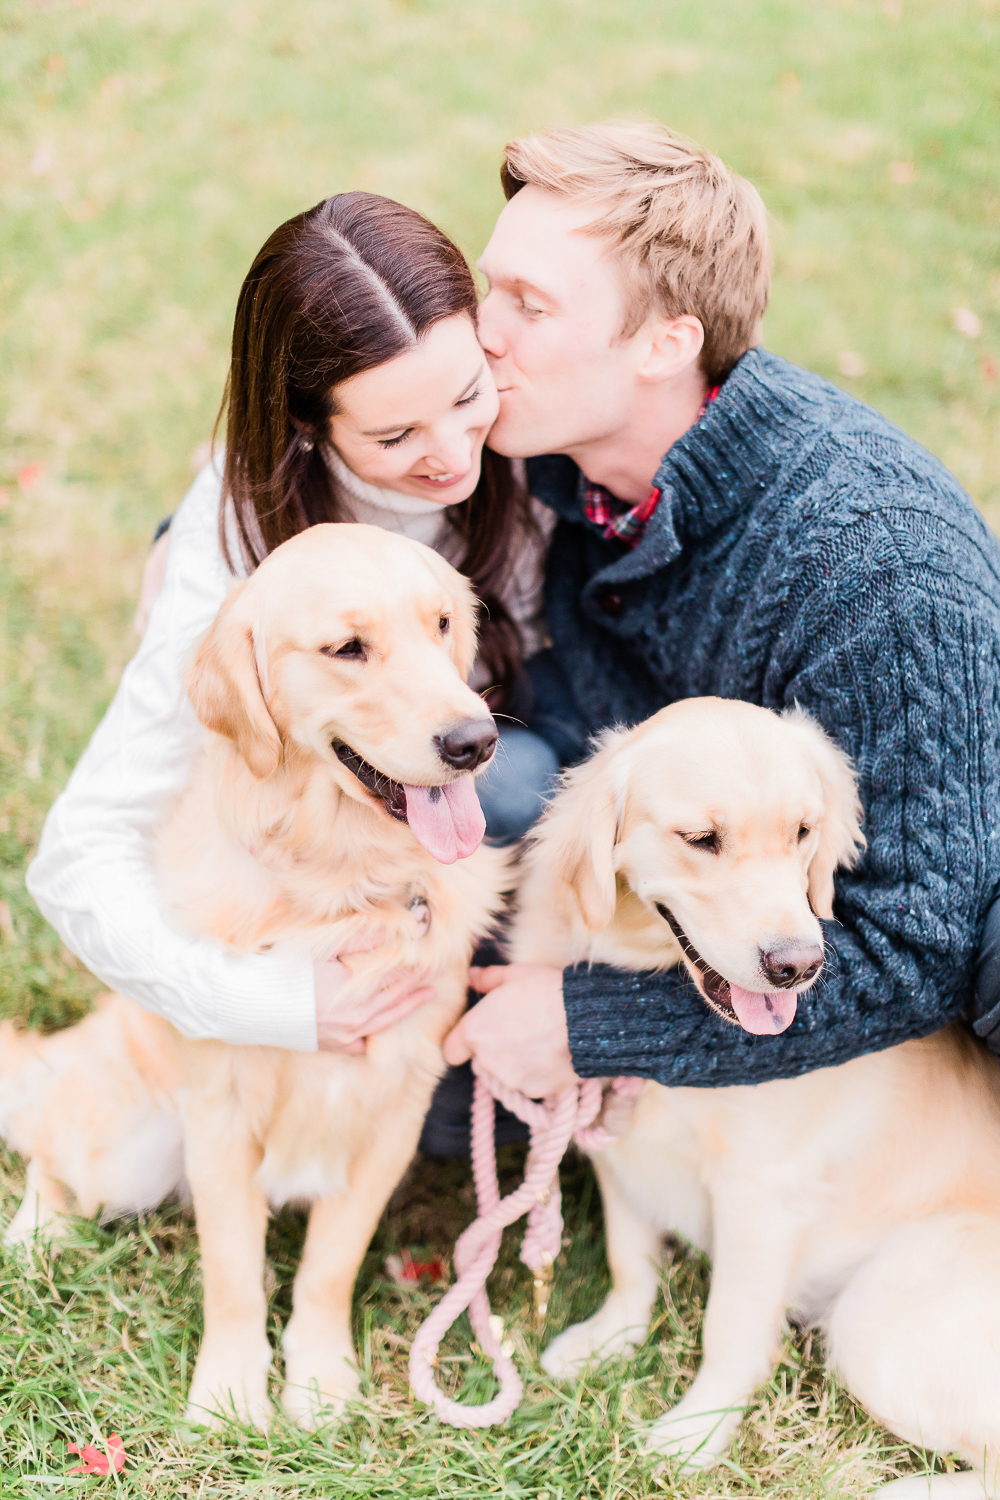 Best of November: The Top 10 Things I Loved in November 2019 by popular affordable fashion blogger Stephanie Ziajka on Diary of a Debutante, cute golden retrievers, golden retriever family, fall engagement pictures, fall engagement photo ideas, engagement pictures with pets